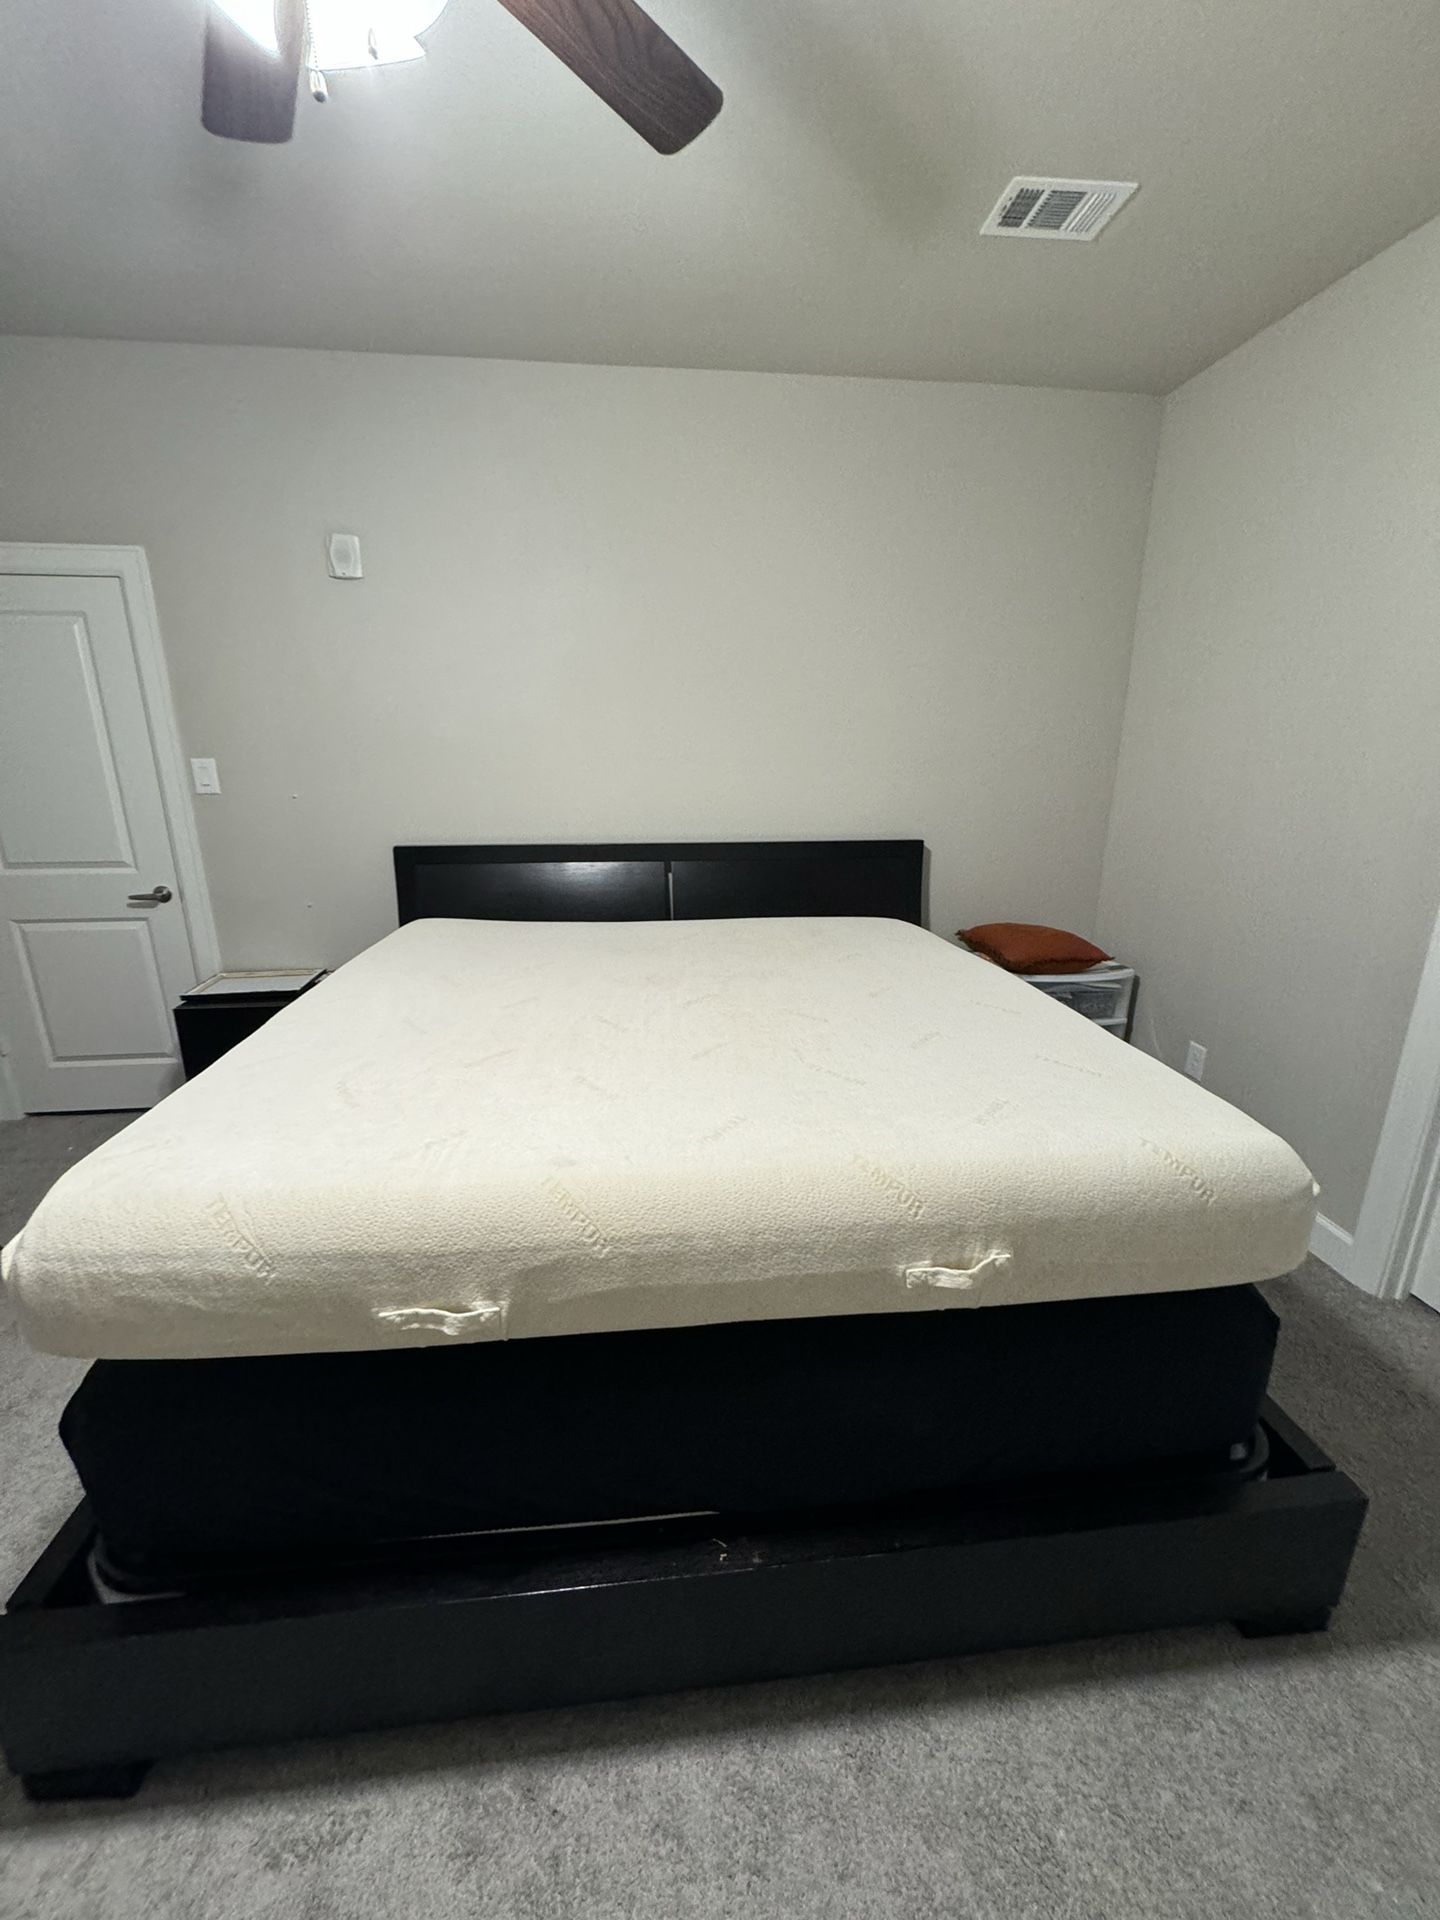 1. BOX SPRINGS WITH CALI KING MATTRESS 2. KING BED